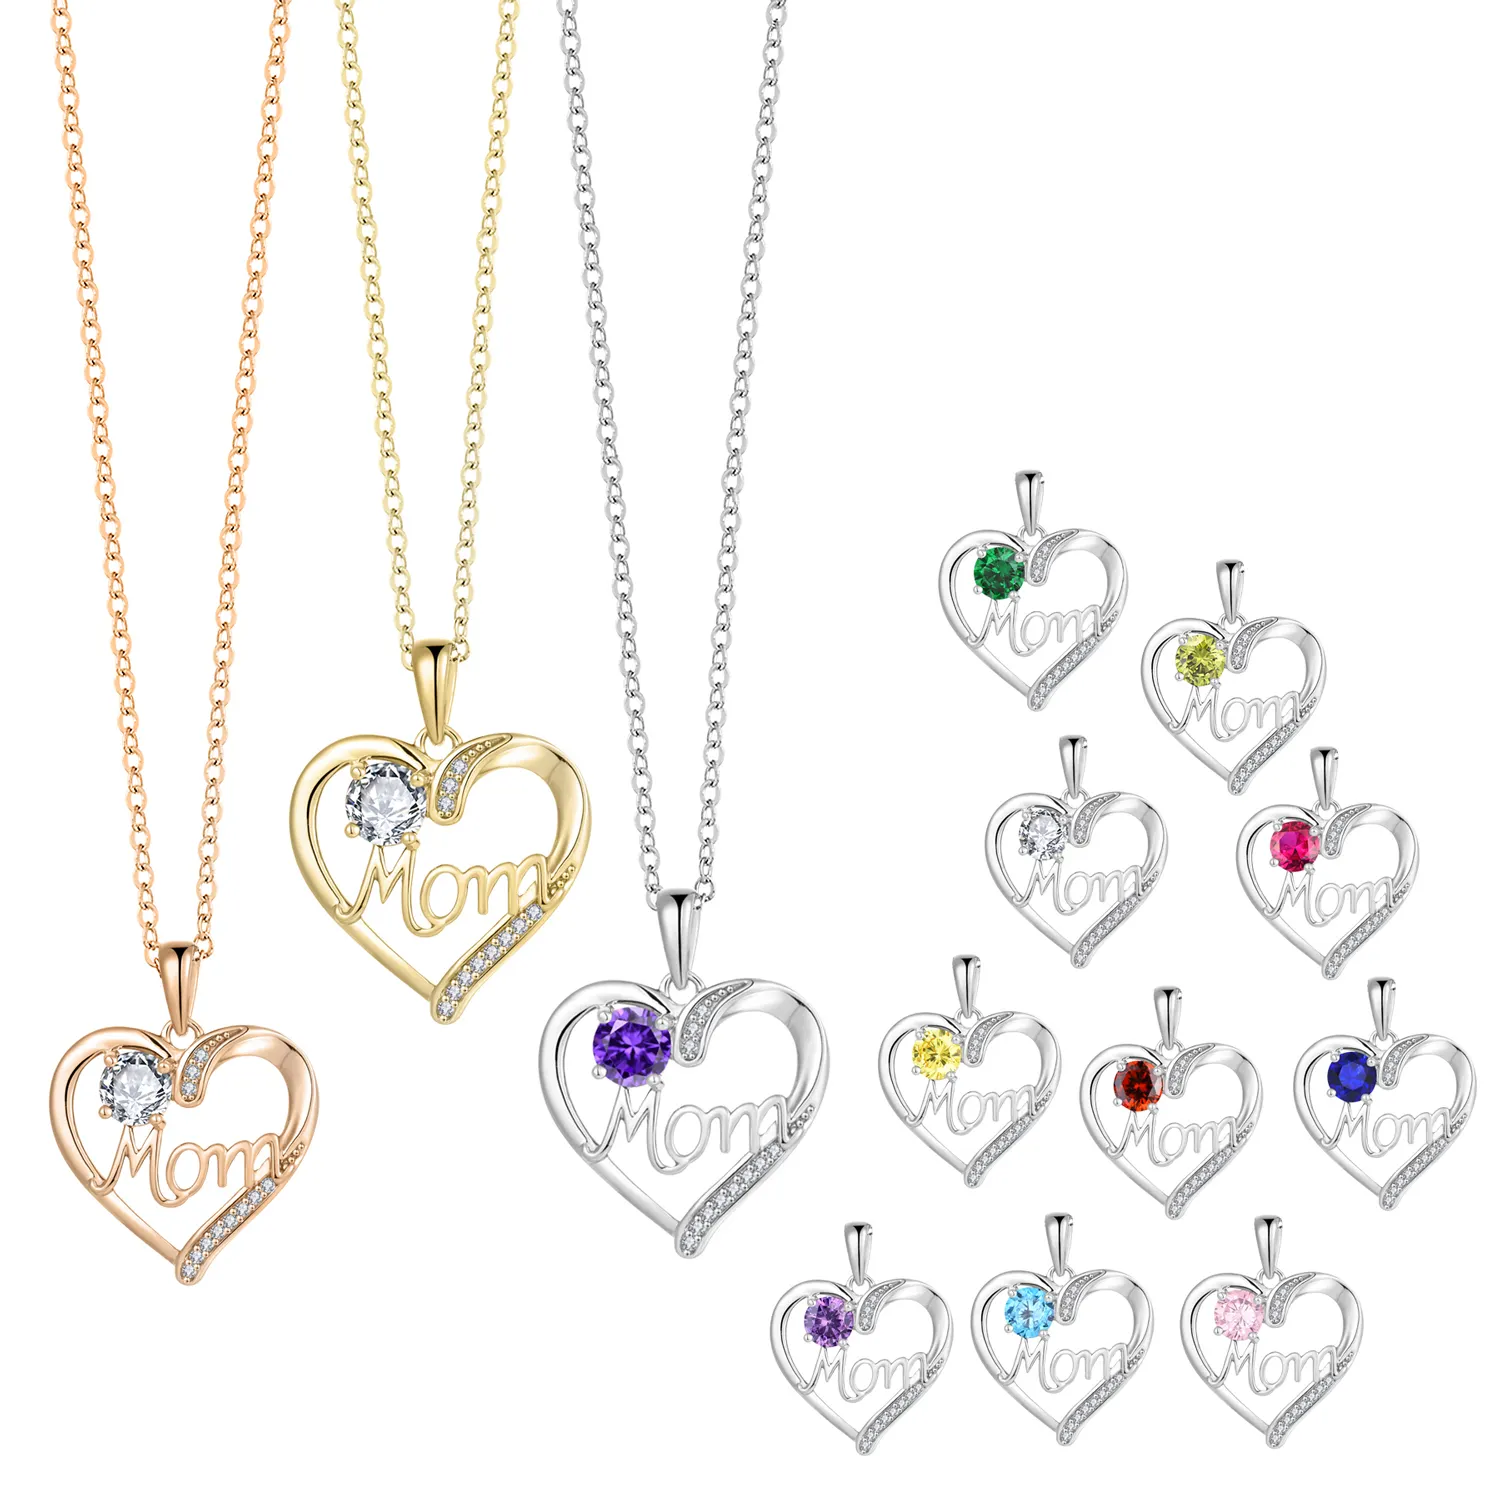 Wholesale Mom Love Heart shape sterling silver craft special mother's day gift women birthstone Pendant necklace